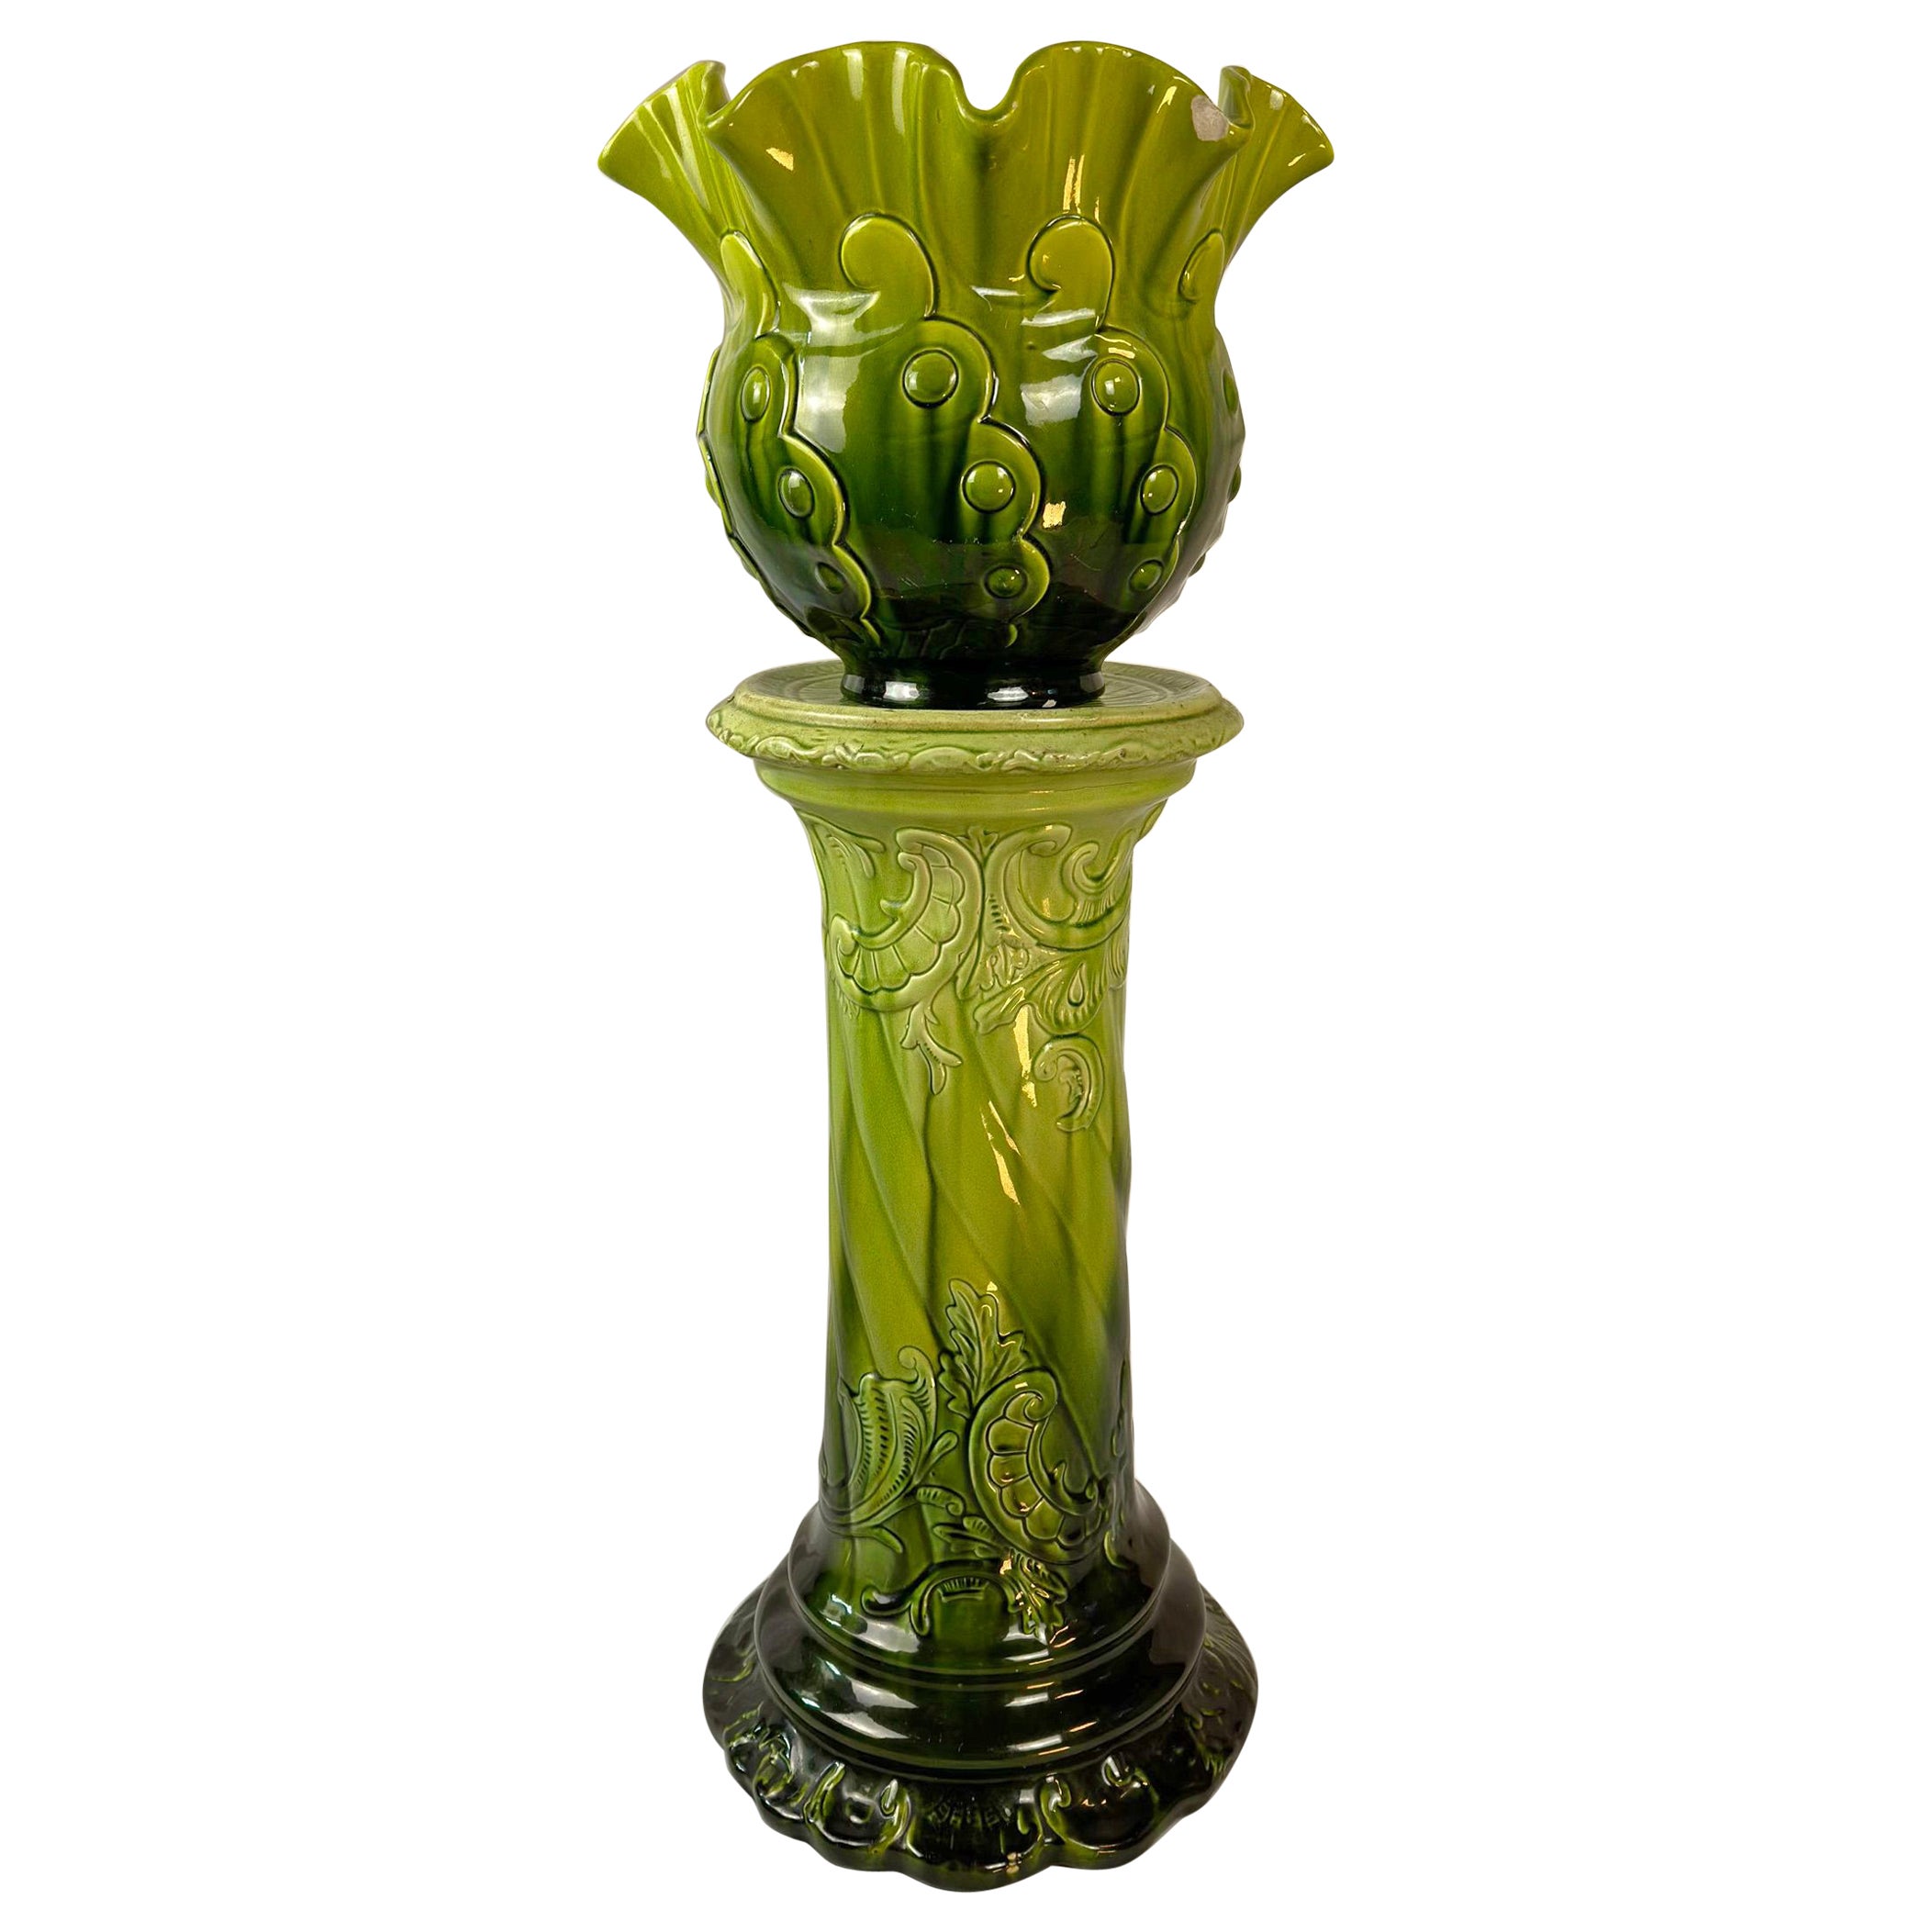 Victorian, Majolica Jardiniere - Green Pottery Planter and Pedestal by Bretby